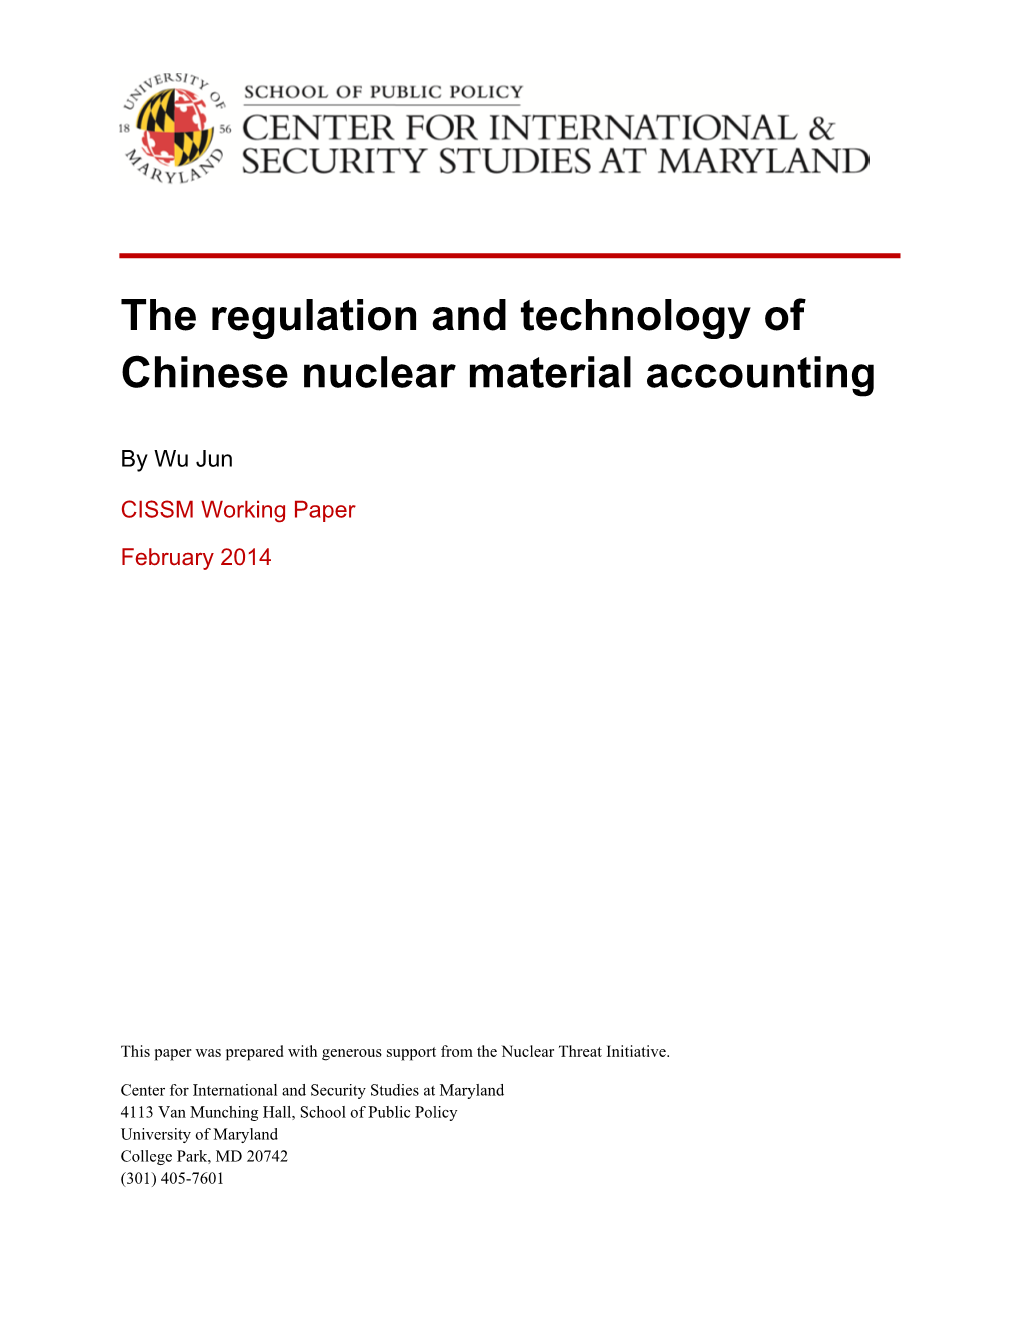 The Regulation and Technology of Chinese Nuclear Material Accounting